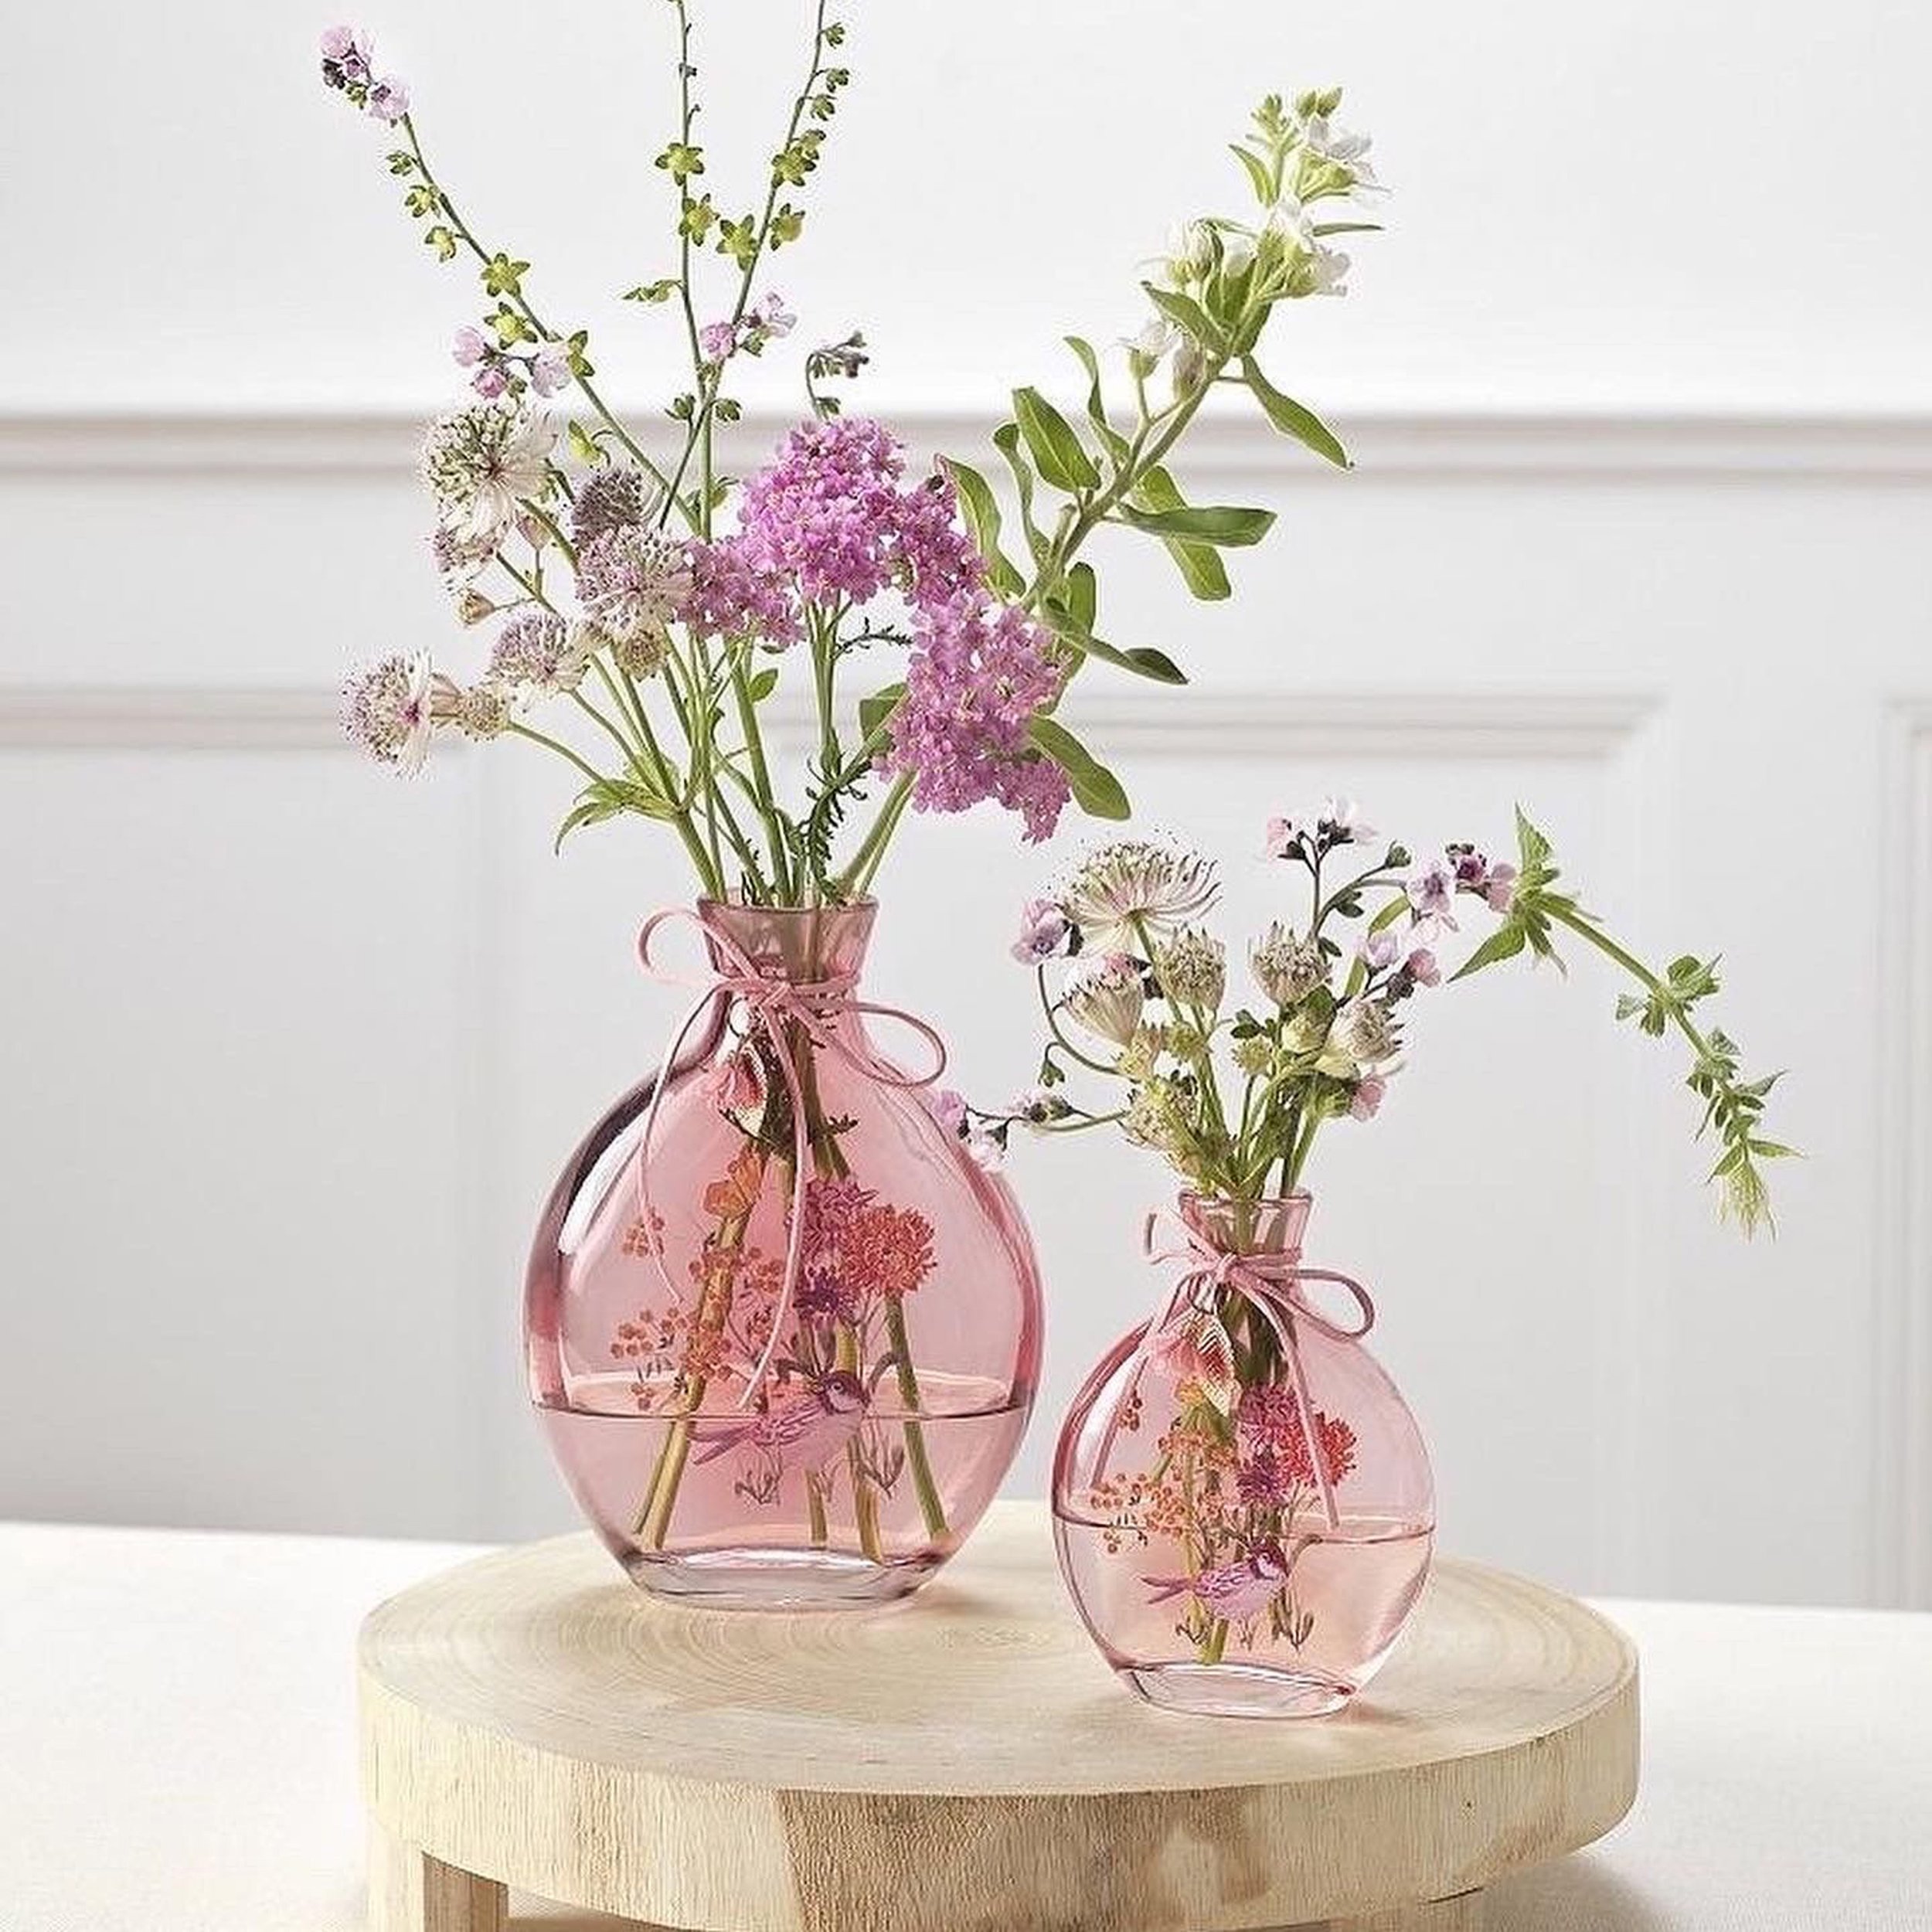 7. Pink Floral Bottle Vases €4.97 (small) and €8.48 (large), 